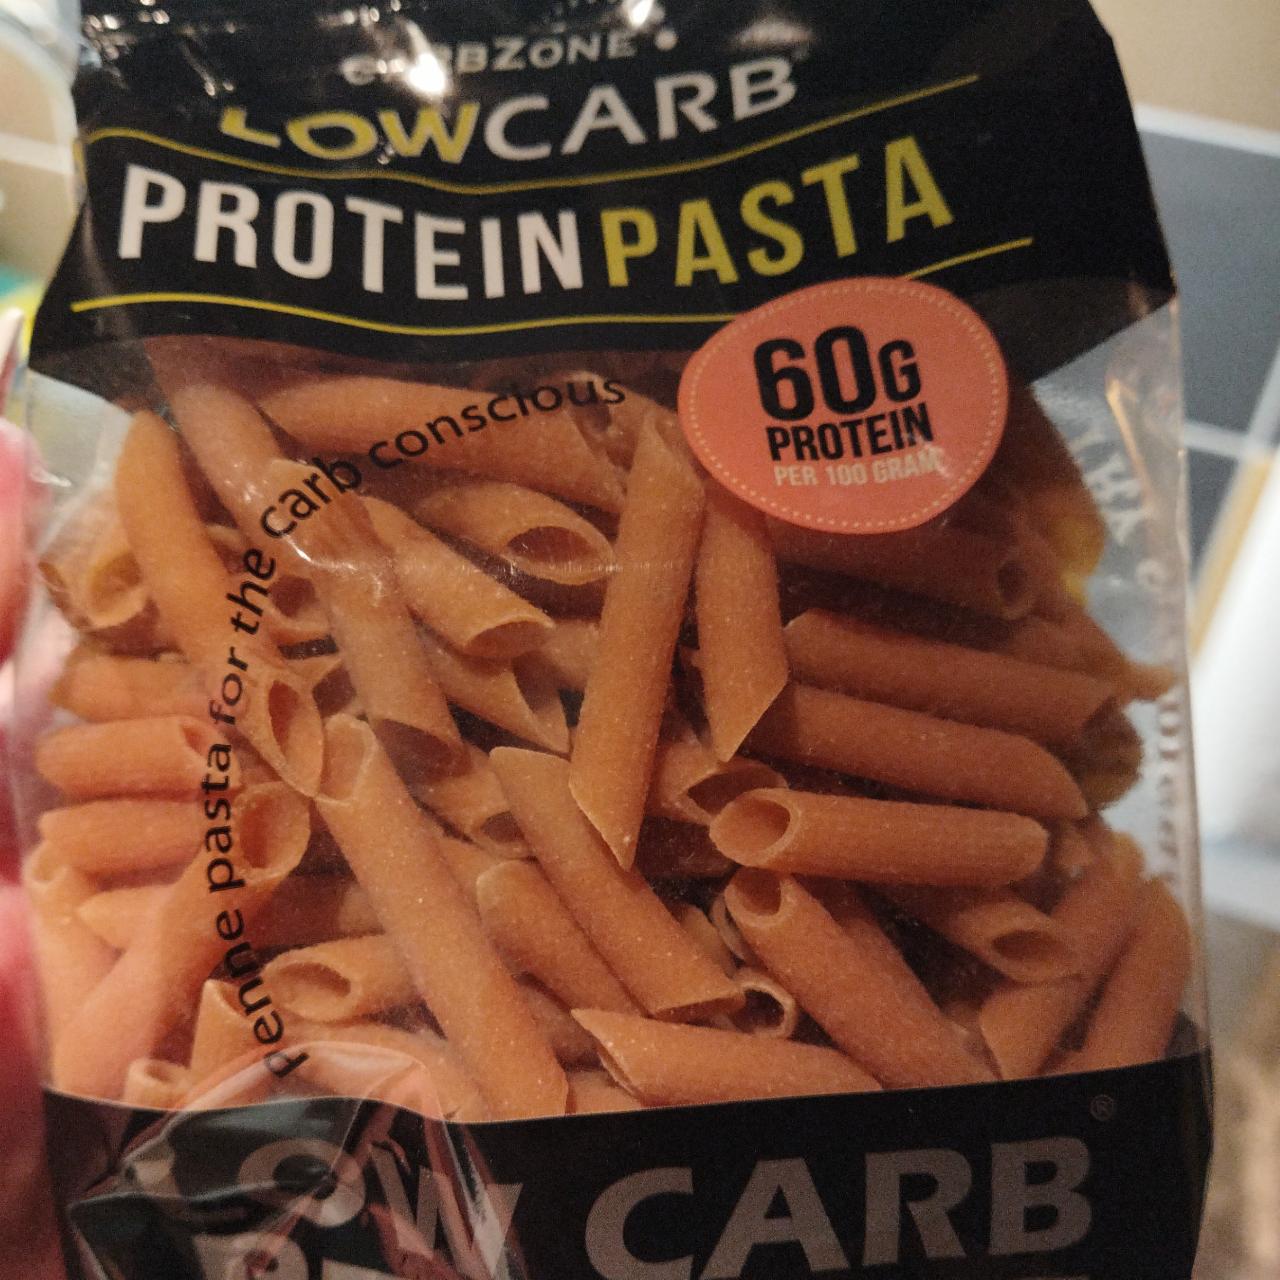 Fotografie - Carbzone Protein Packed Pasta Penne LowCarb